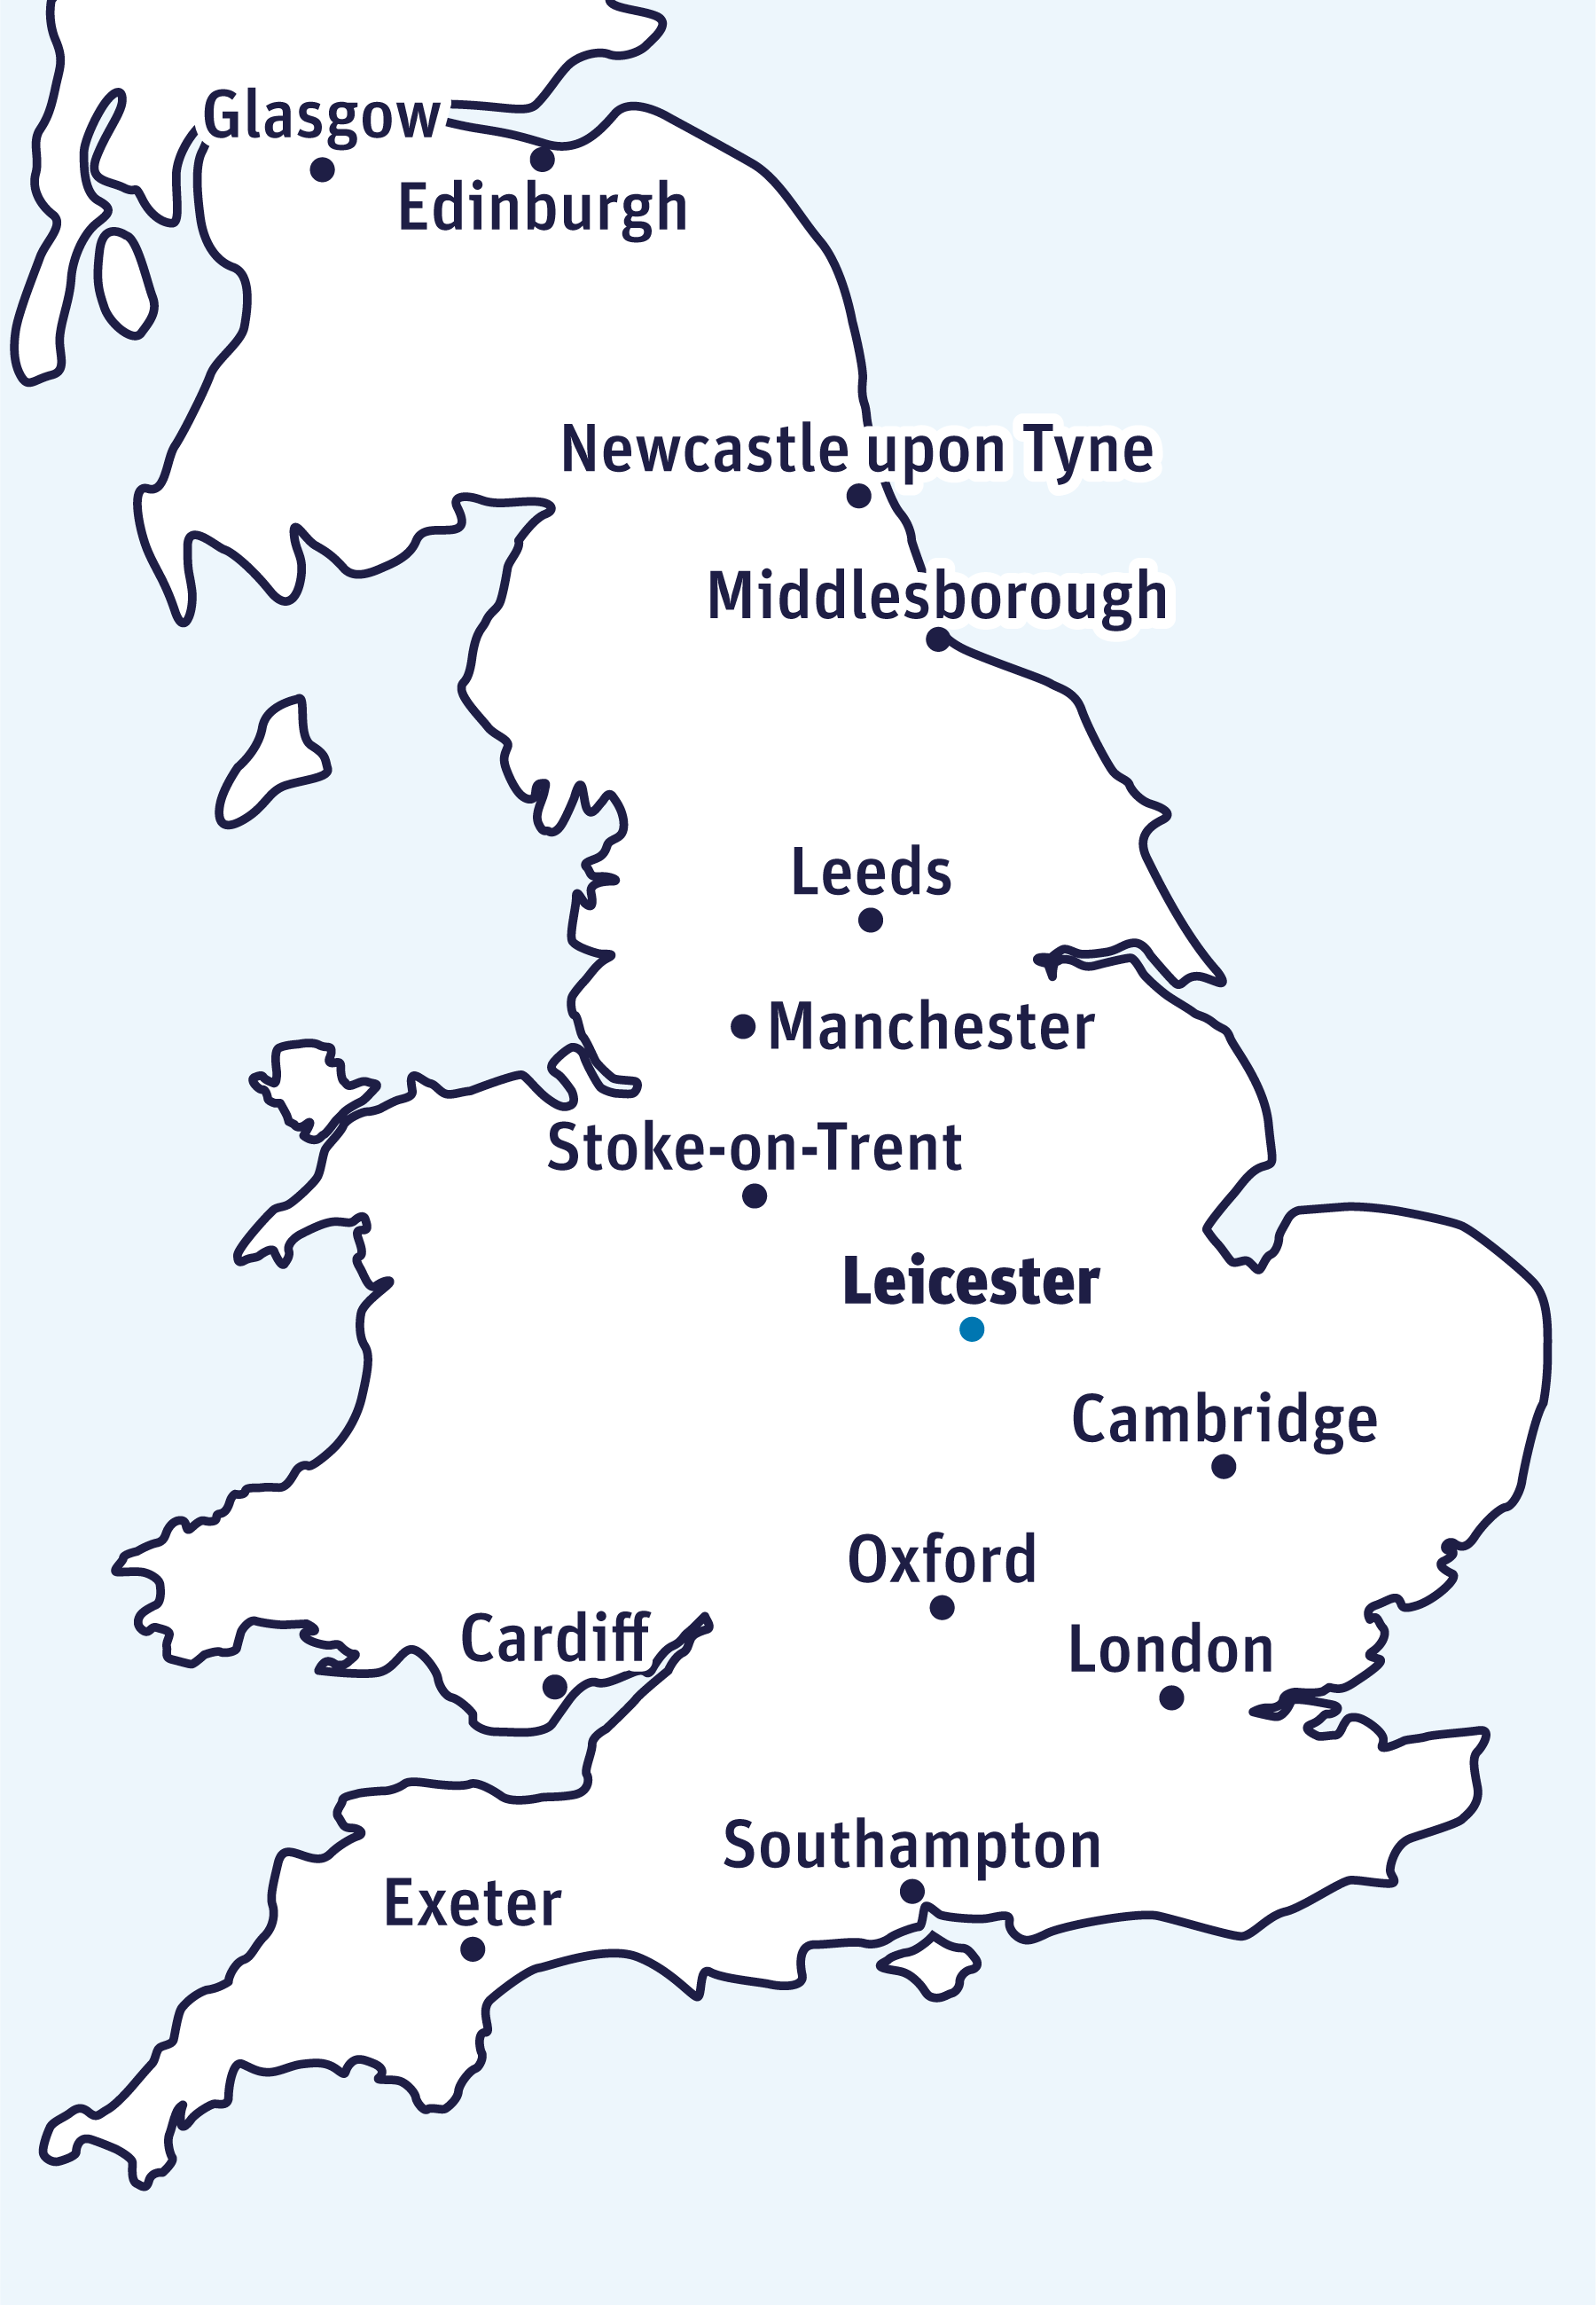 Map of lower half of Britain/England/United Kingdom. Showing Leicester in the middle